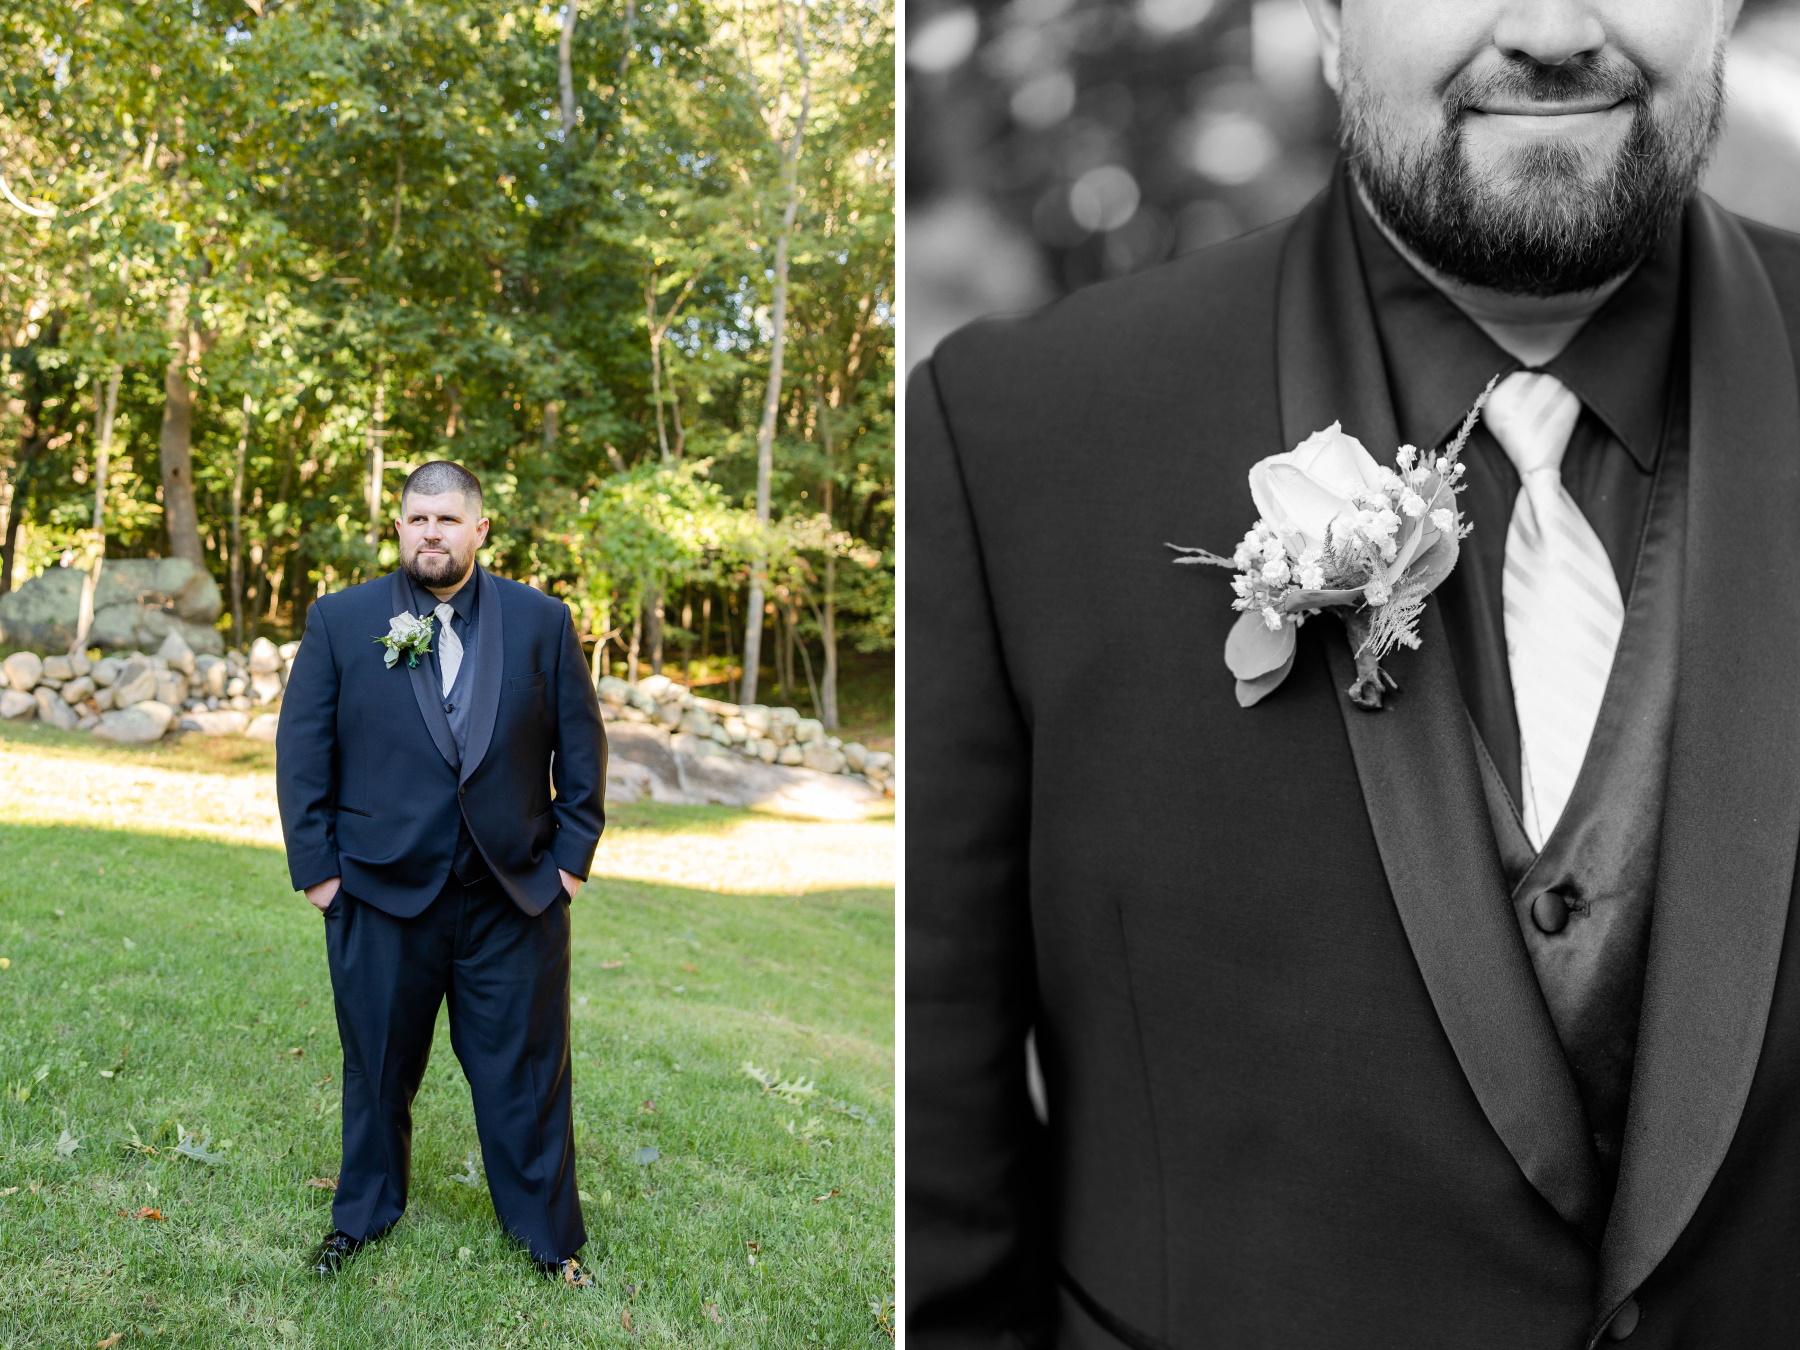 Left photo is Groom looking off to the side with hands in his pockets. Right photo is a closeup of groom's tie and boutonniere at Great Neck Country Club Wedding